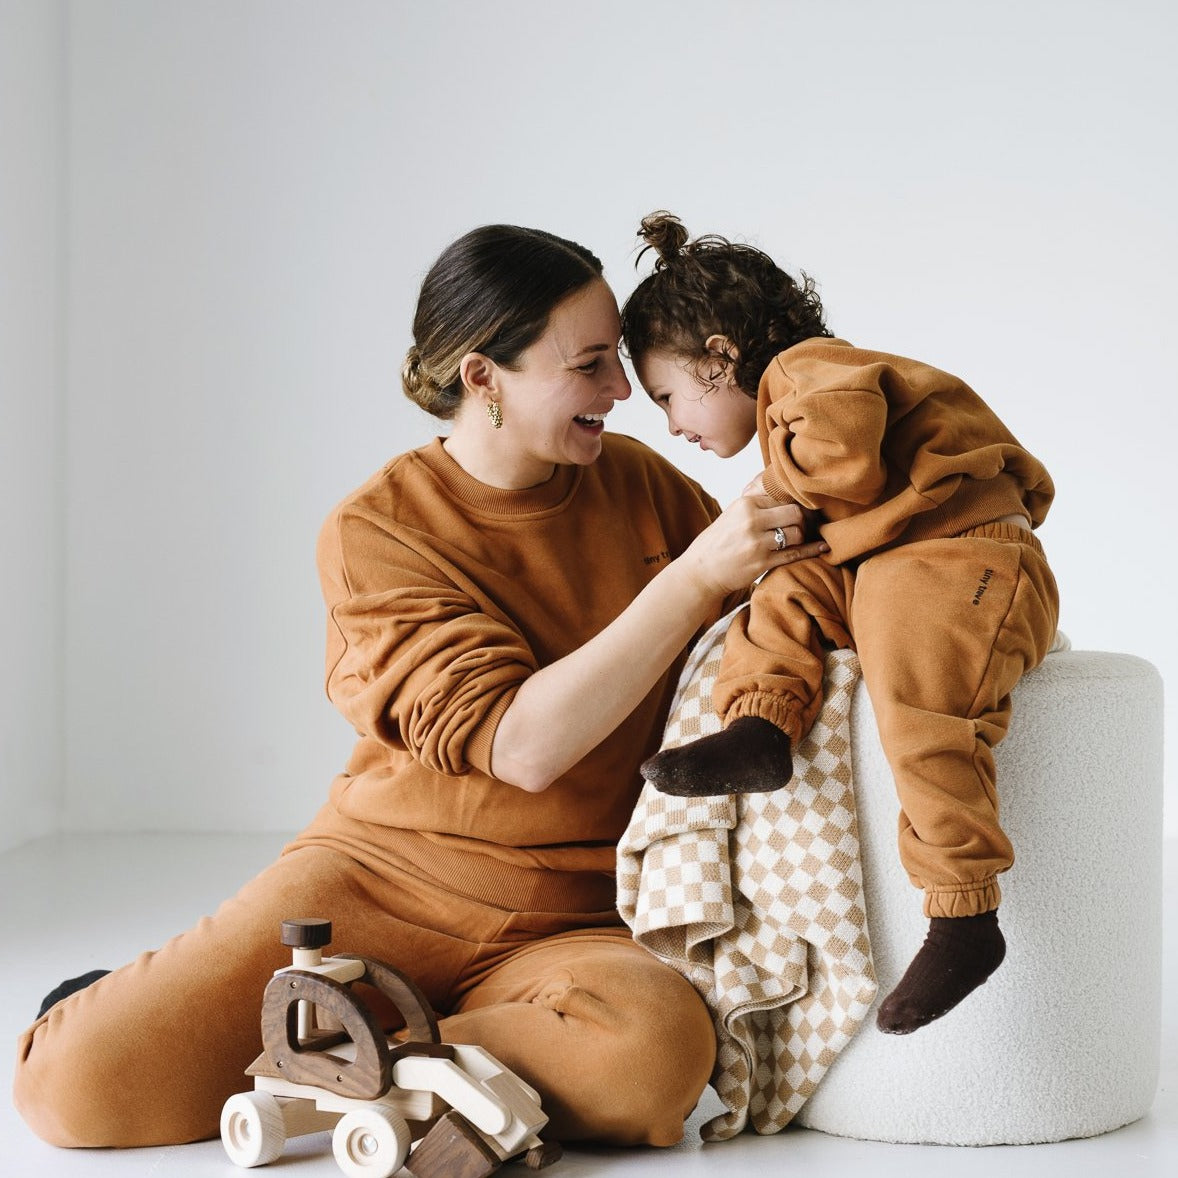 Tracksuit Woodie pour adulte Tiny Trove - Cannelle